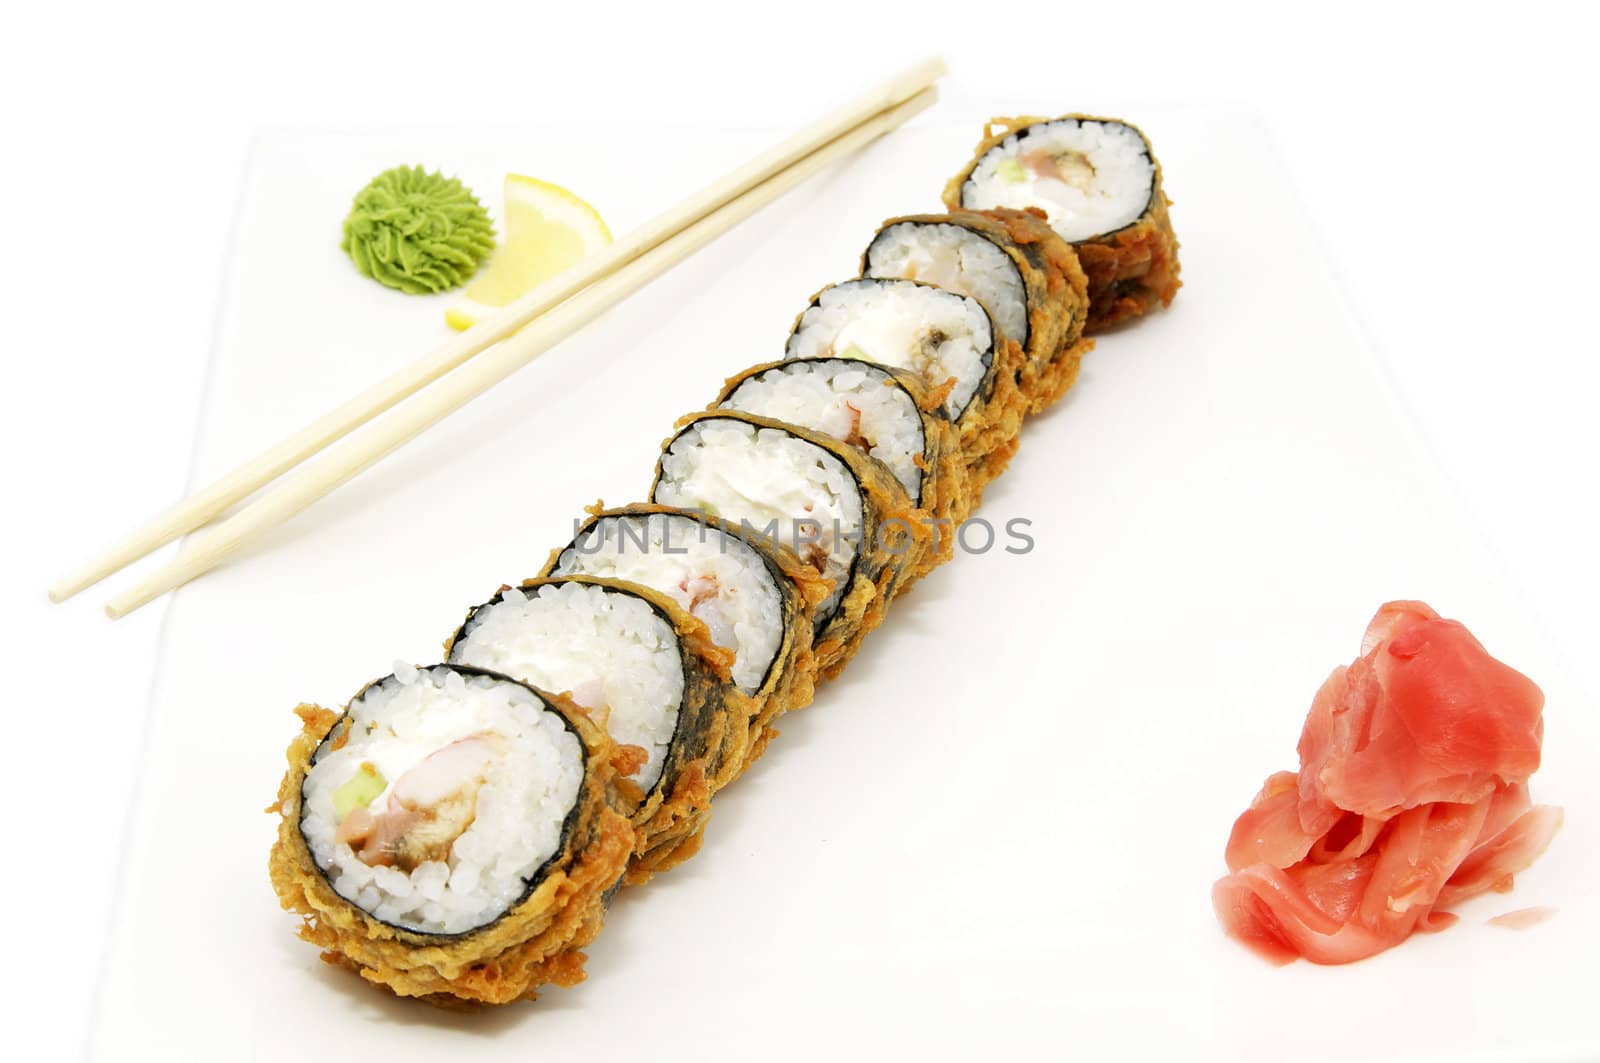 portion of the rolls and chopsticks on white background